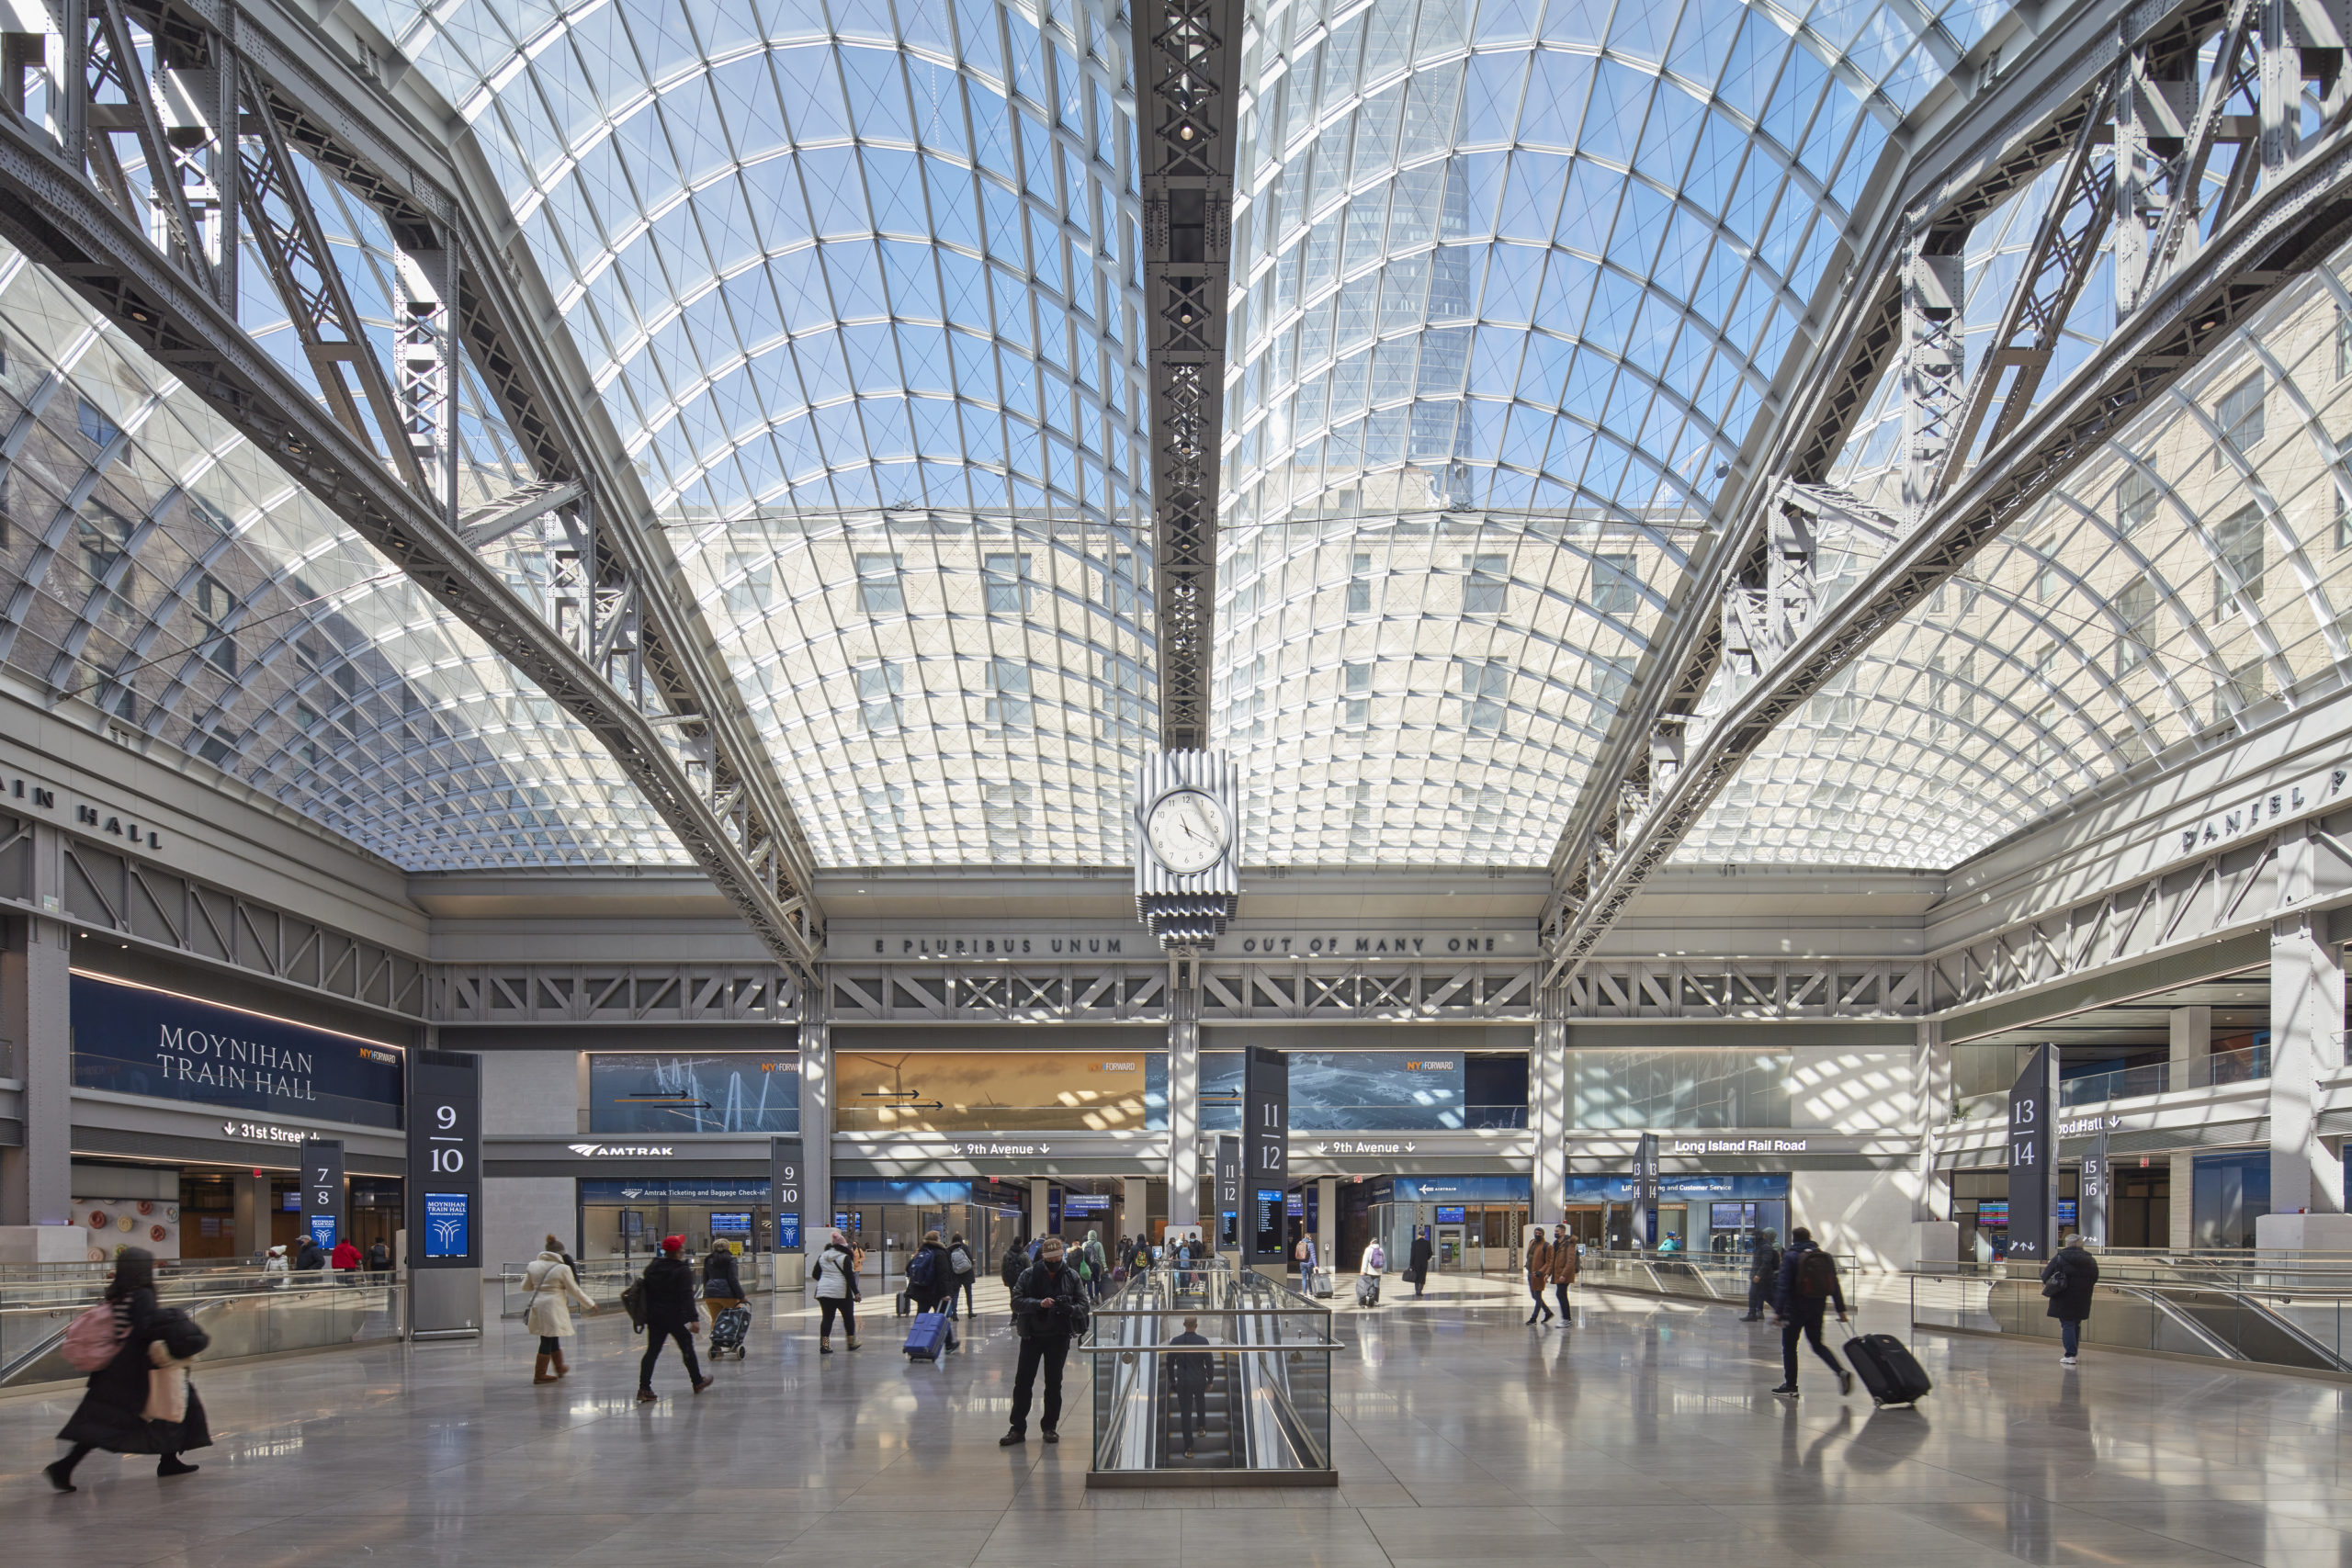 Moynihan Train Hall, Monumental Civic Project That Restores Grandeur Of  Train Travel In New York, Opens January 1 – SOM